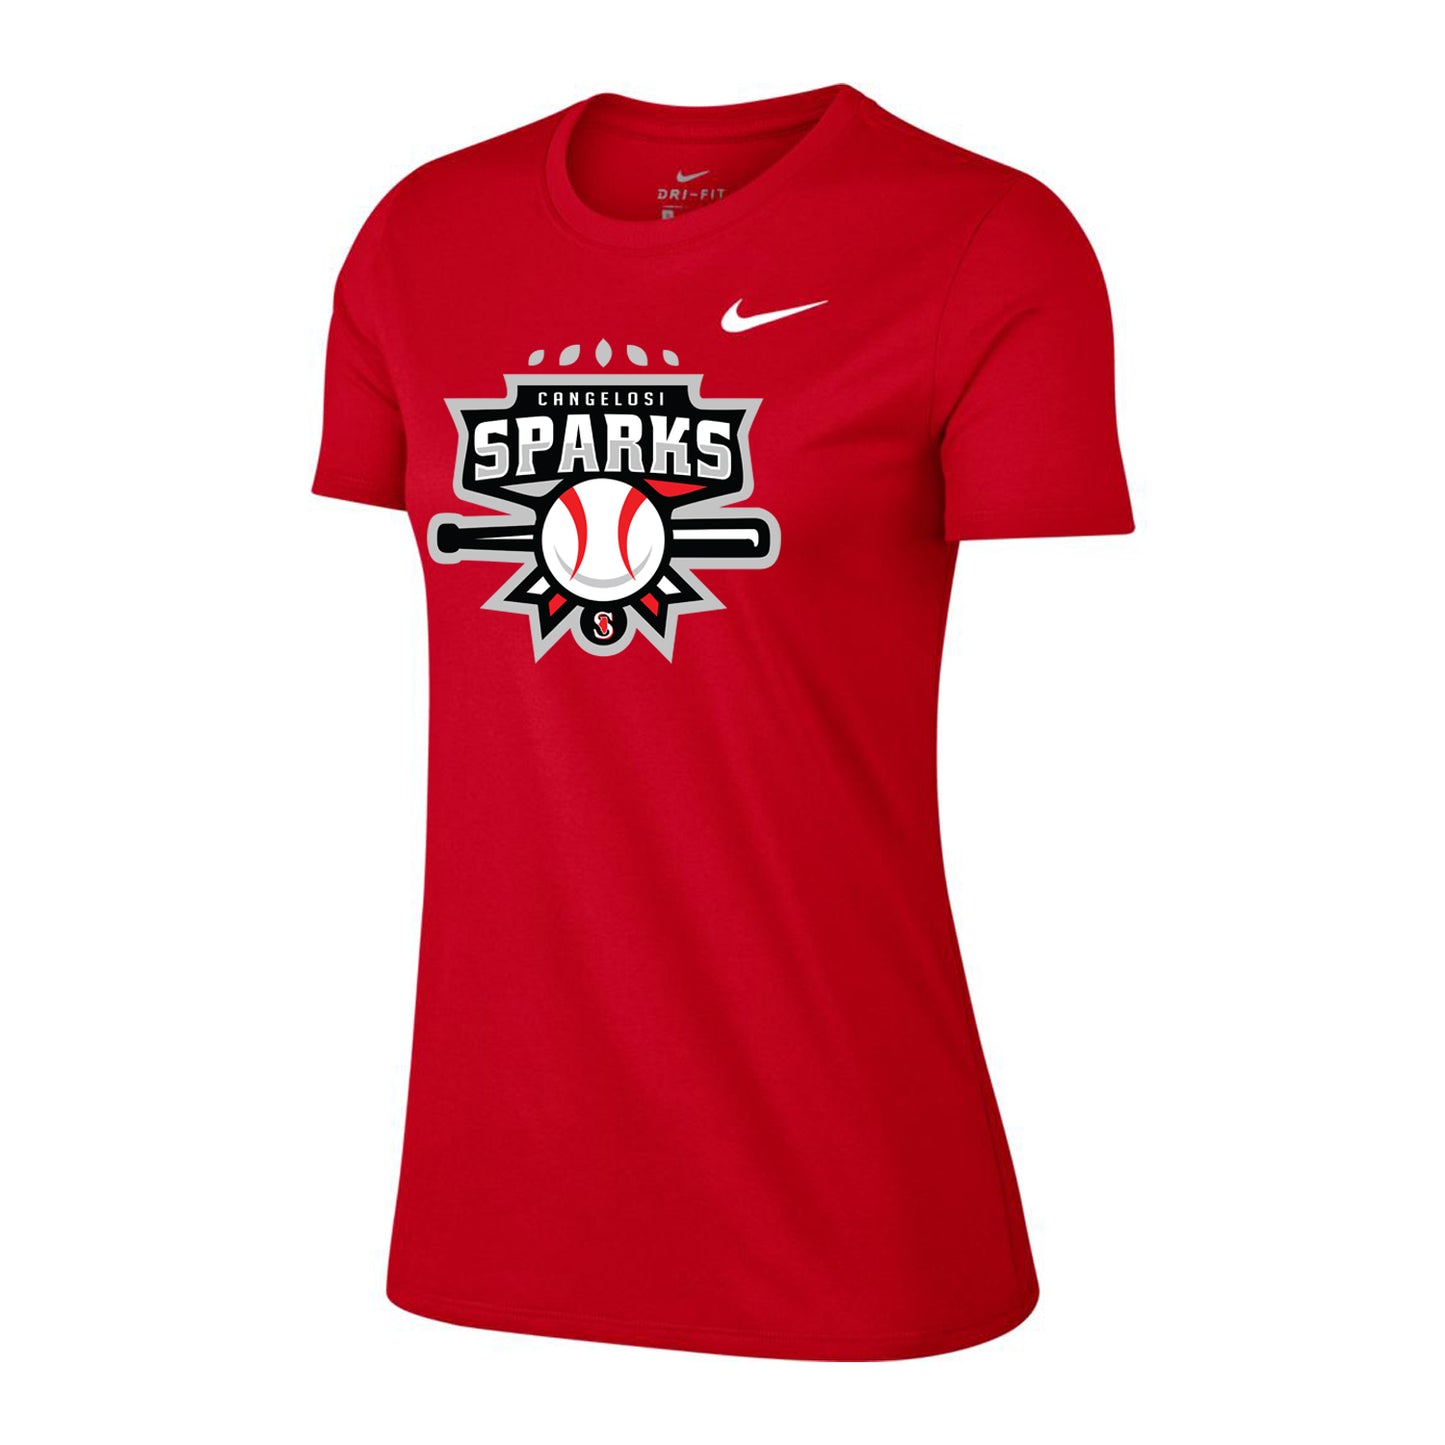 WOMENS NIKE SPARKS LEGEND TEE RED